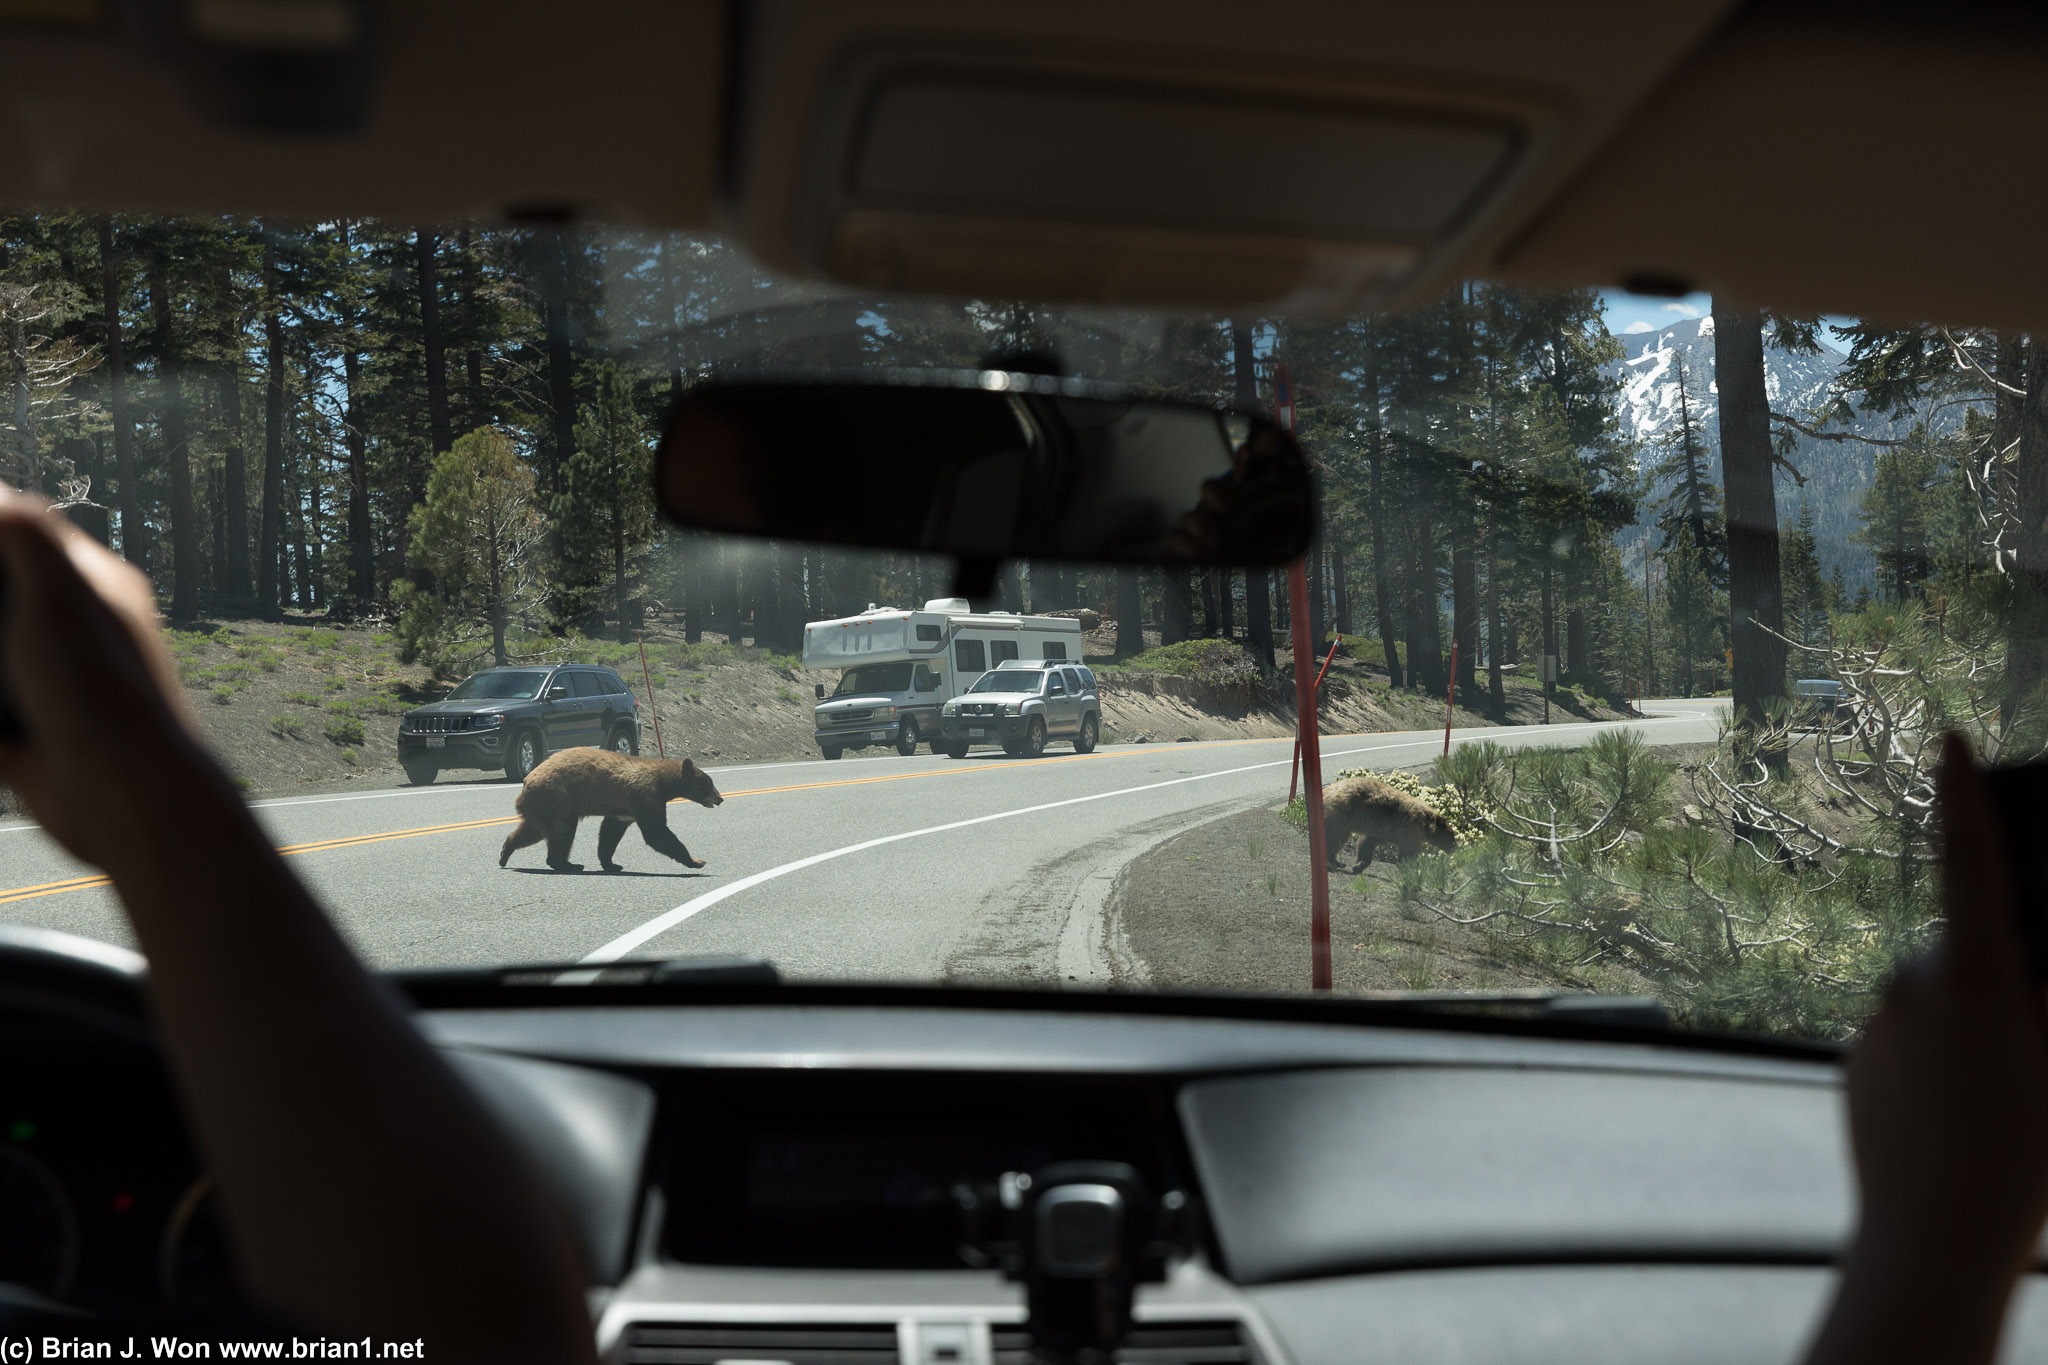 Why did the bears cross the road?